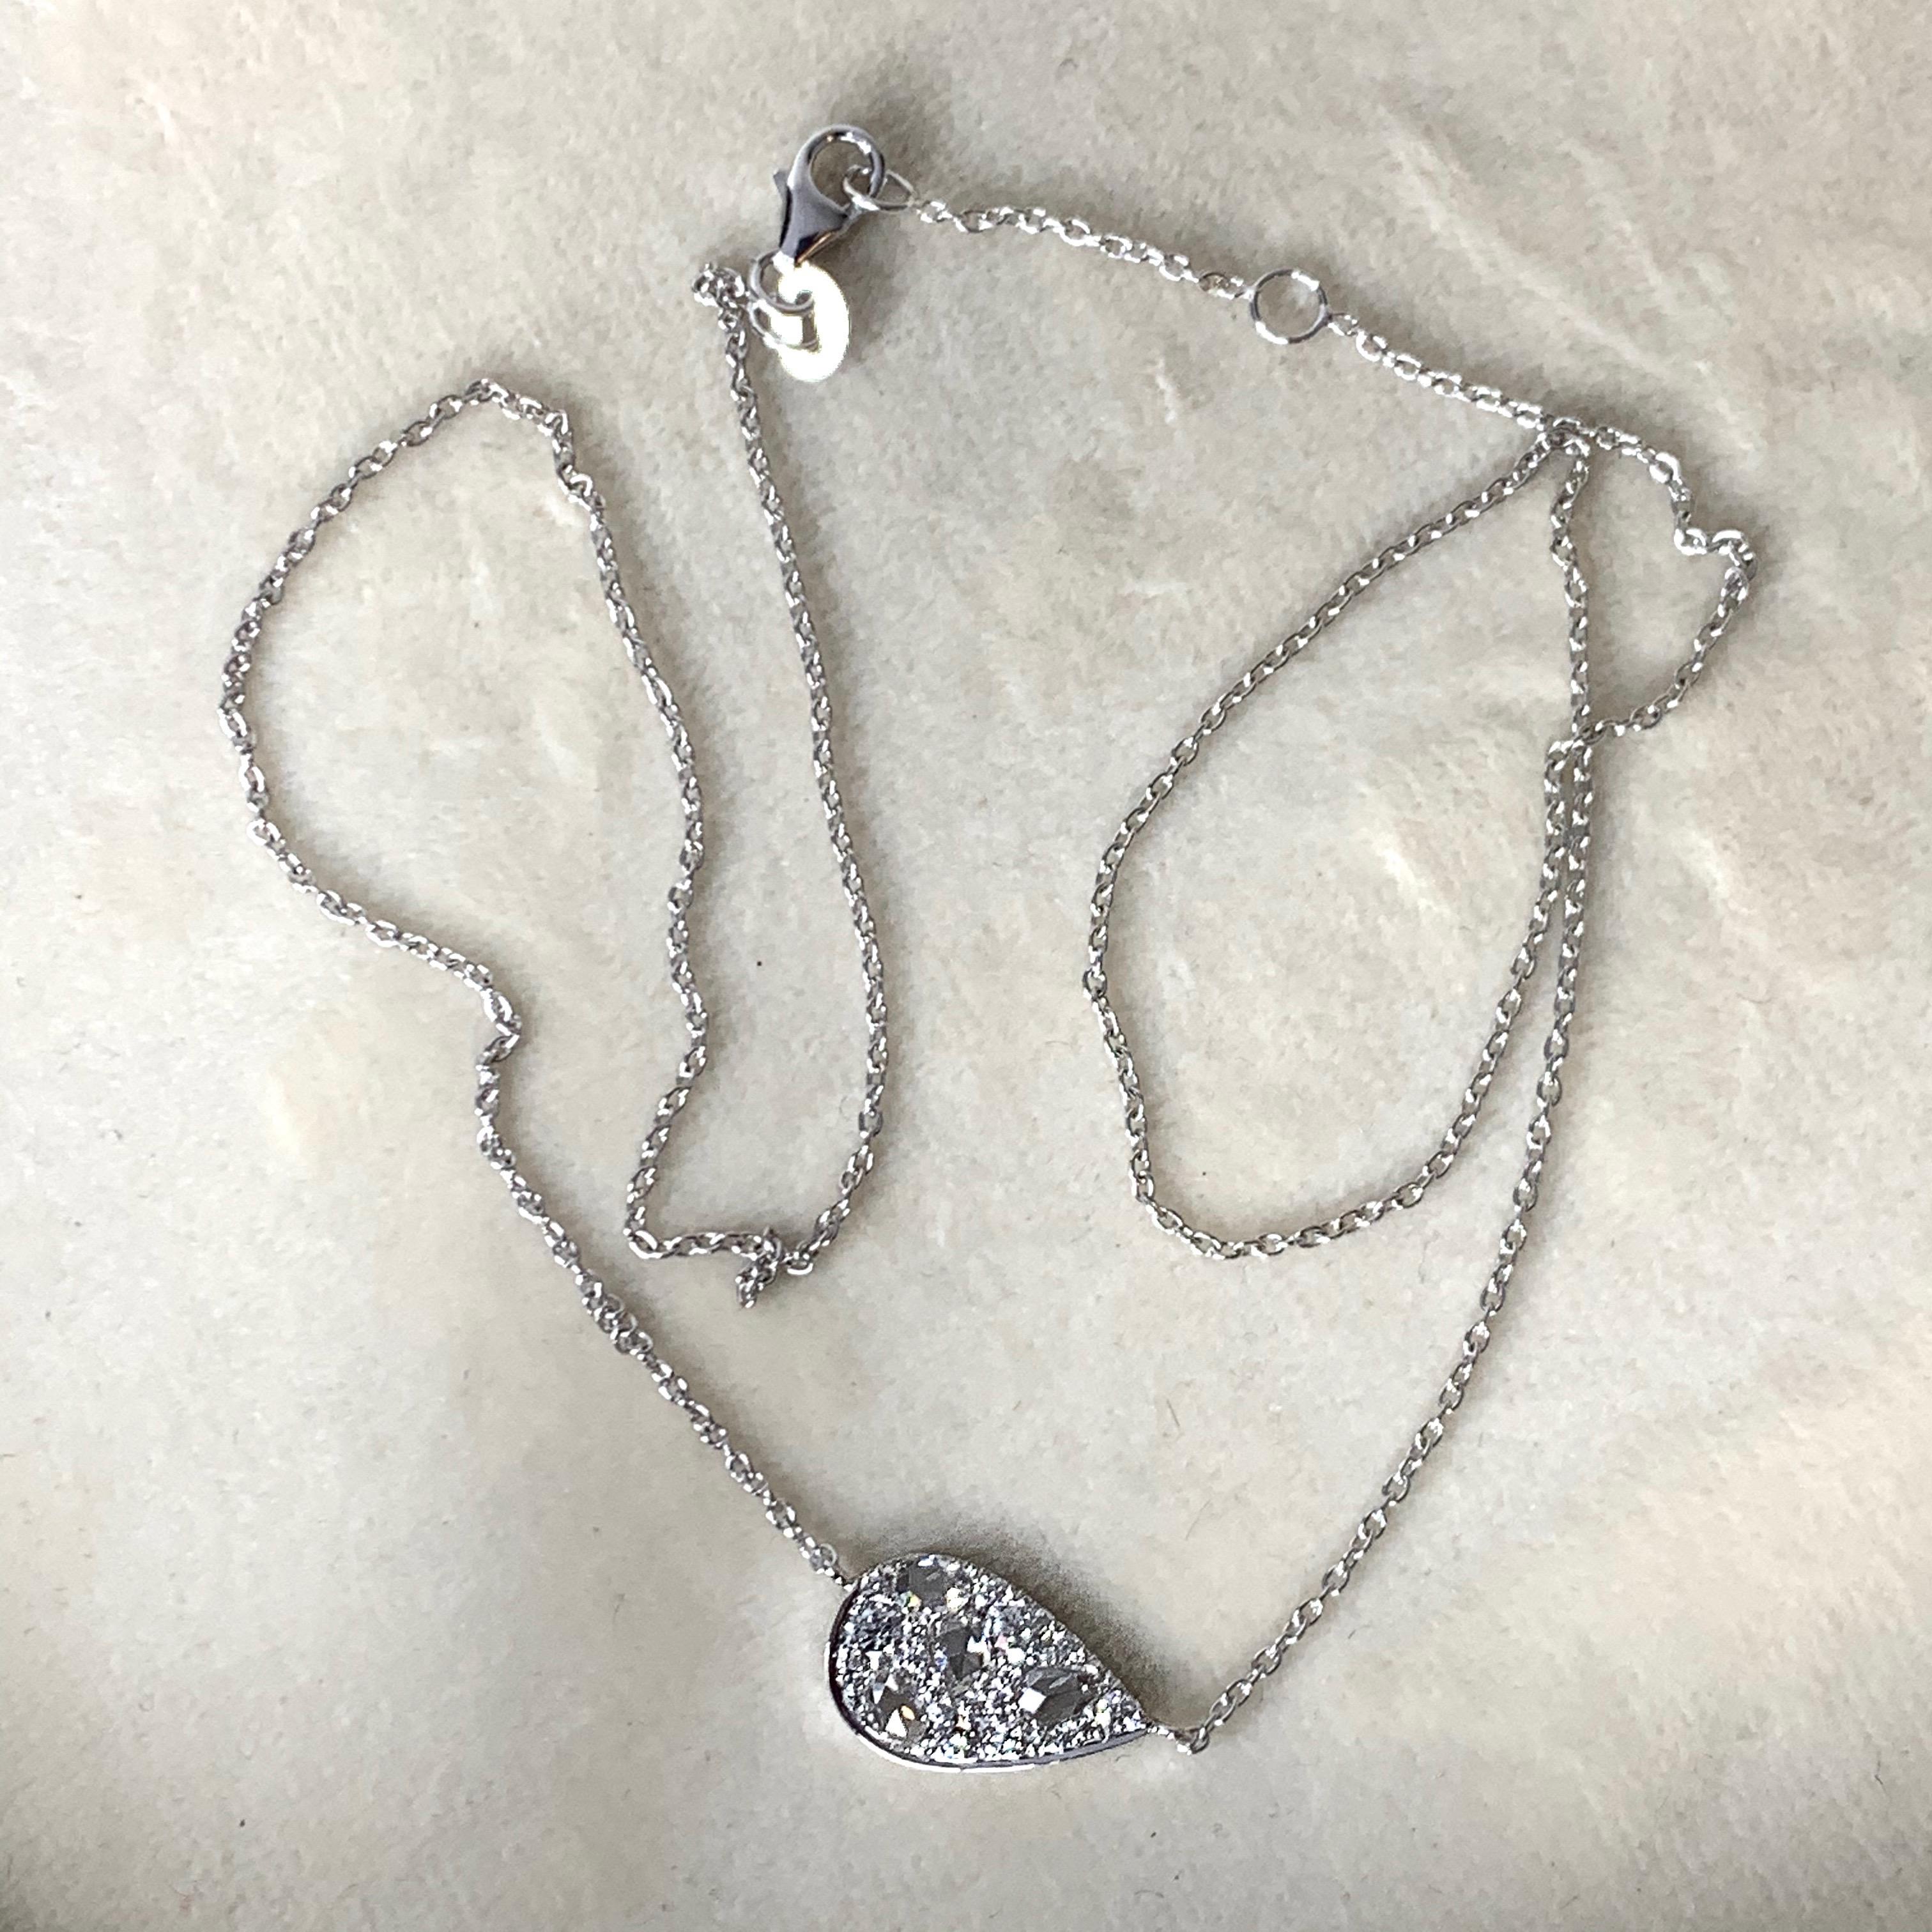 Pendant with neclace handmade ( no casting involved) in Belgium by jewellery artist Joke Quick in 18K white gold 3,6 g pave set with white GHVS rose-cut diamonds 0,37 ct., white DEGVVS brilliant-cut diamonds 0,305 ct.;  Total carat : 0,675 ct..